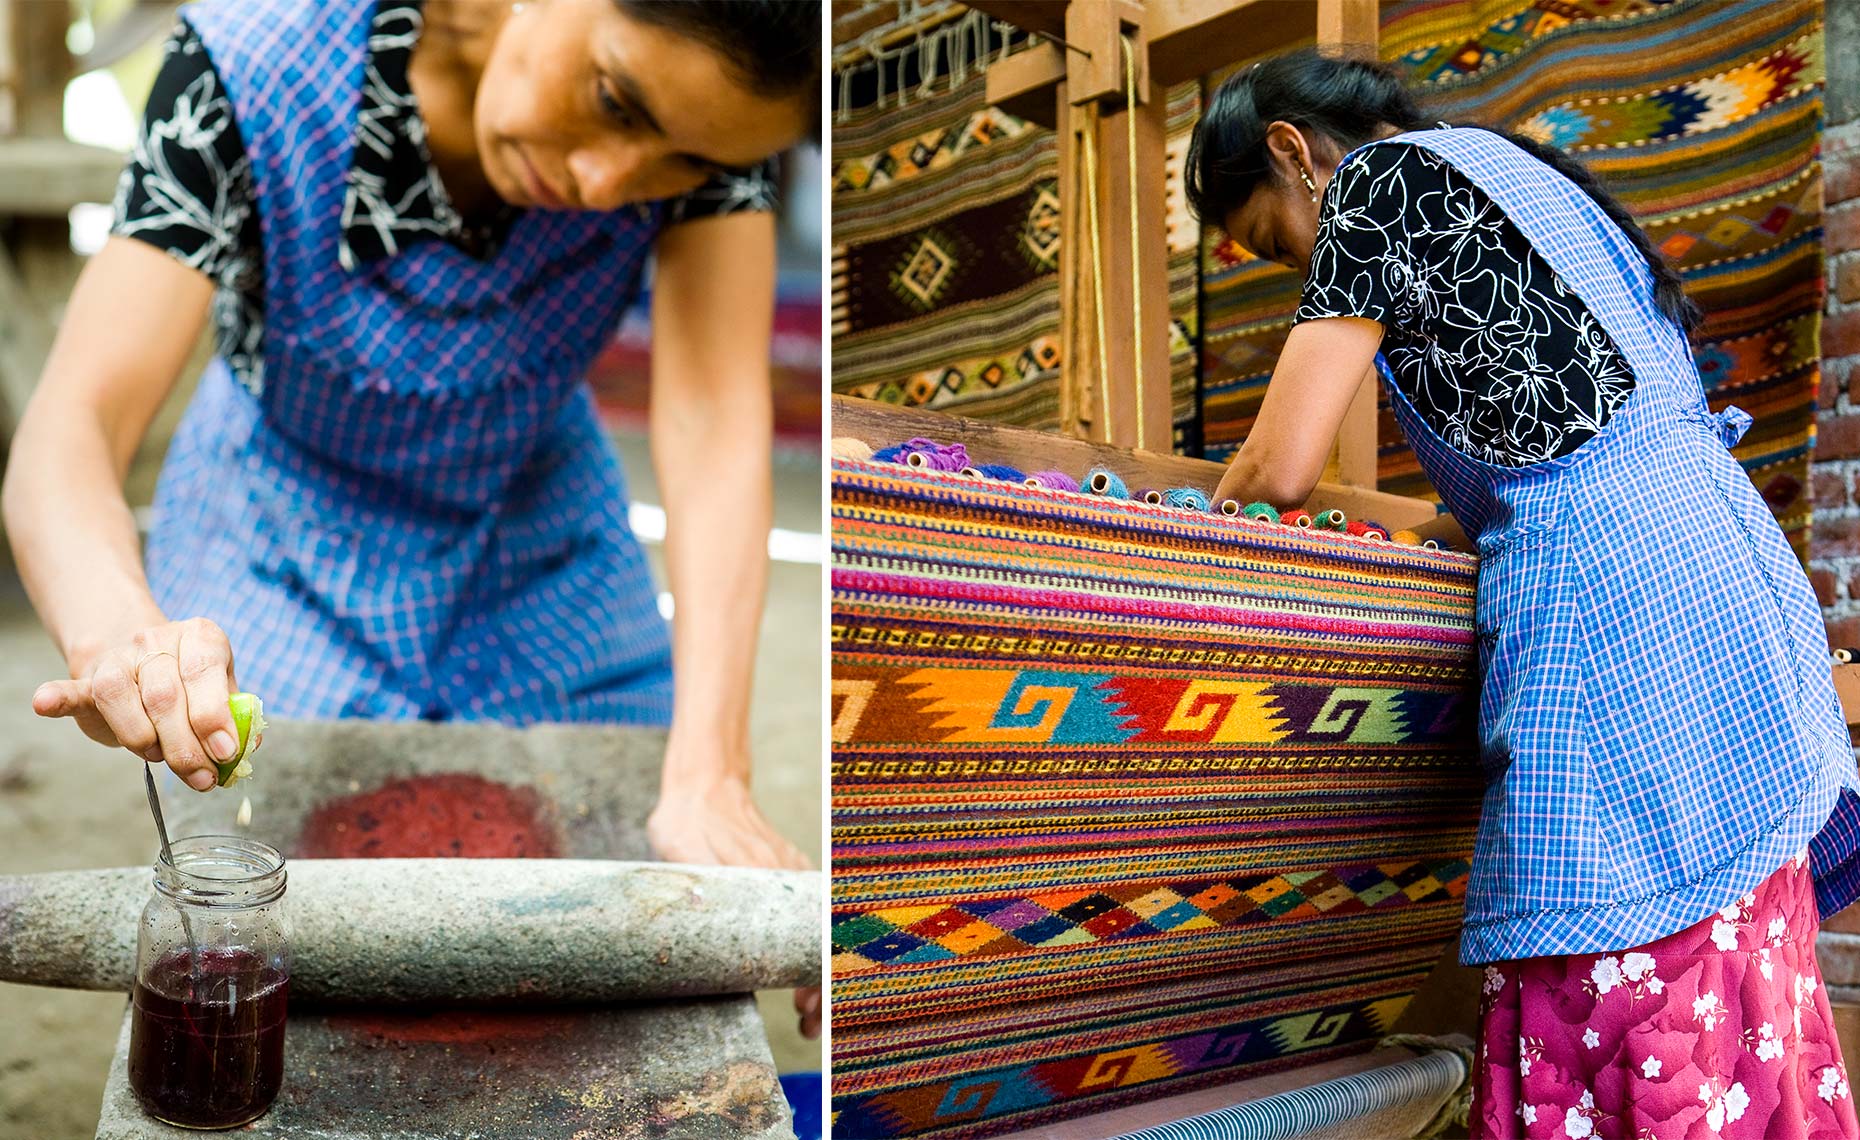 Process of making traditional rugs